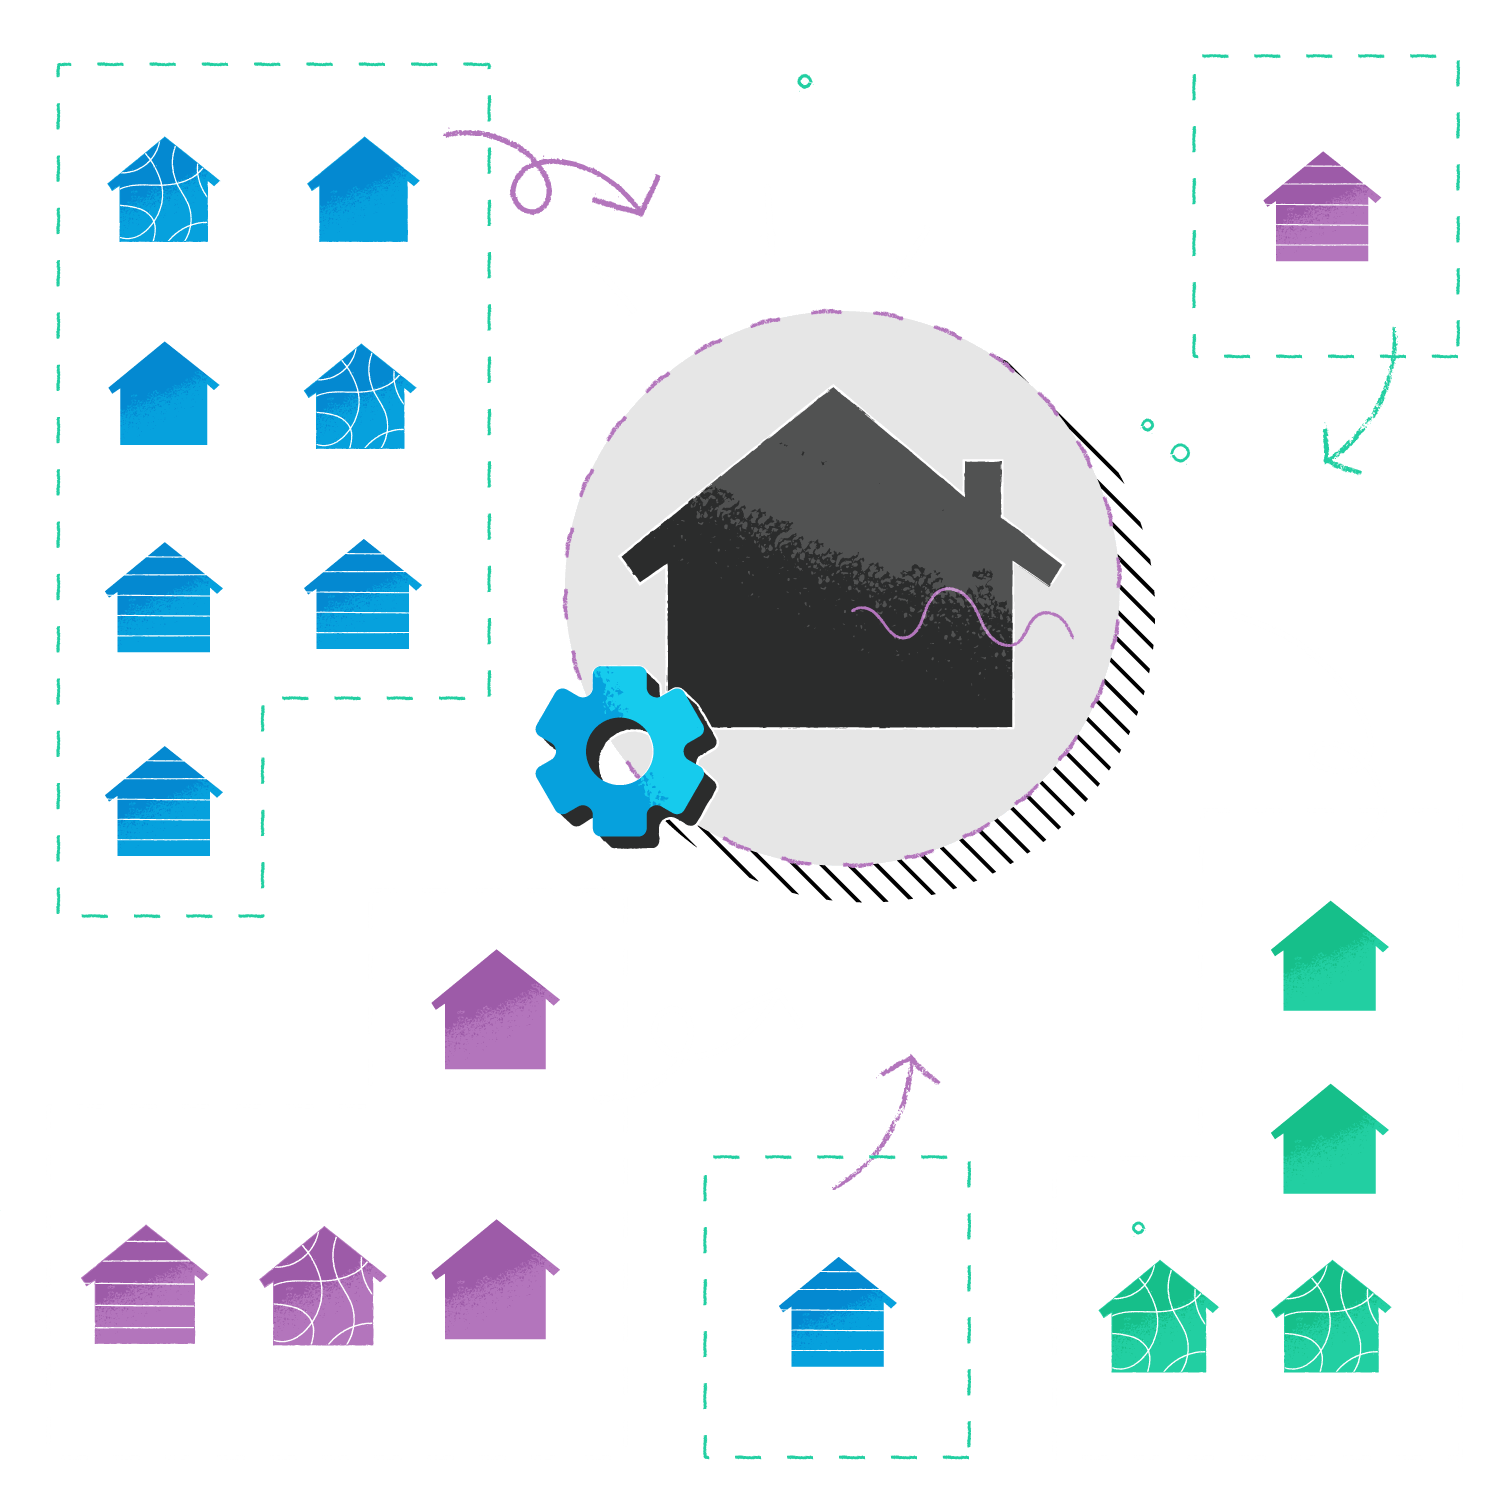 Aggregating offers from a variety of property providers and keeping them in sync within a single system